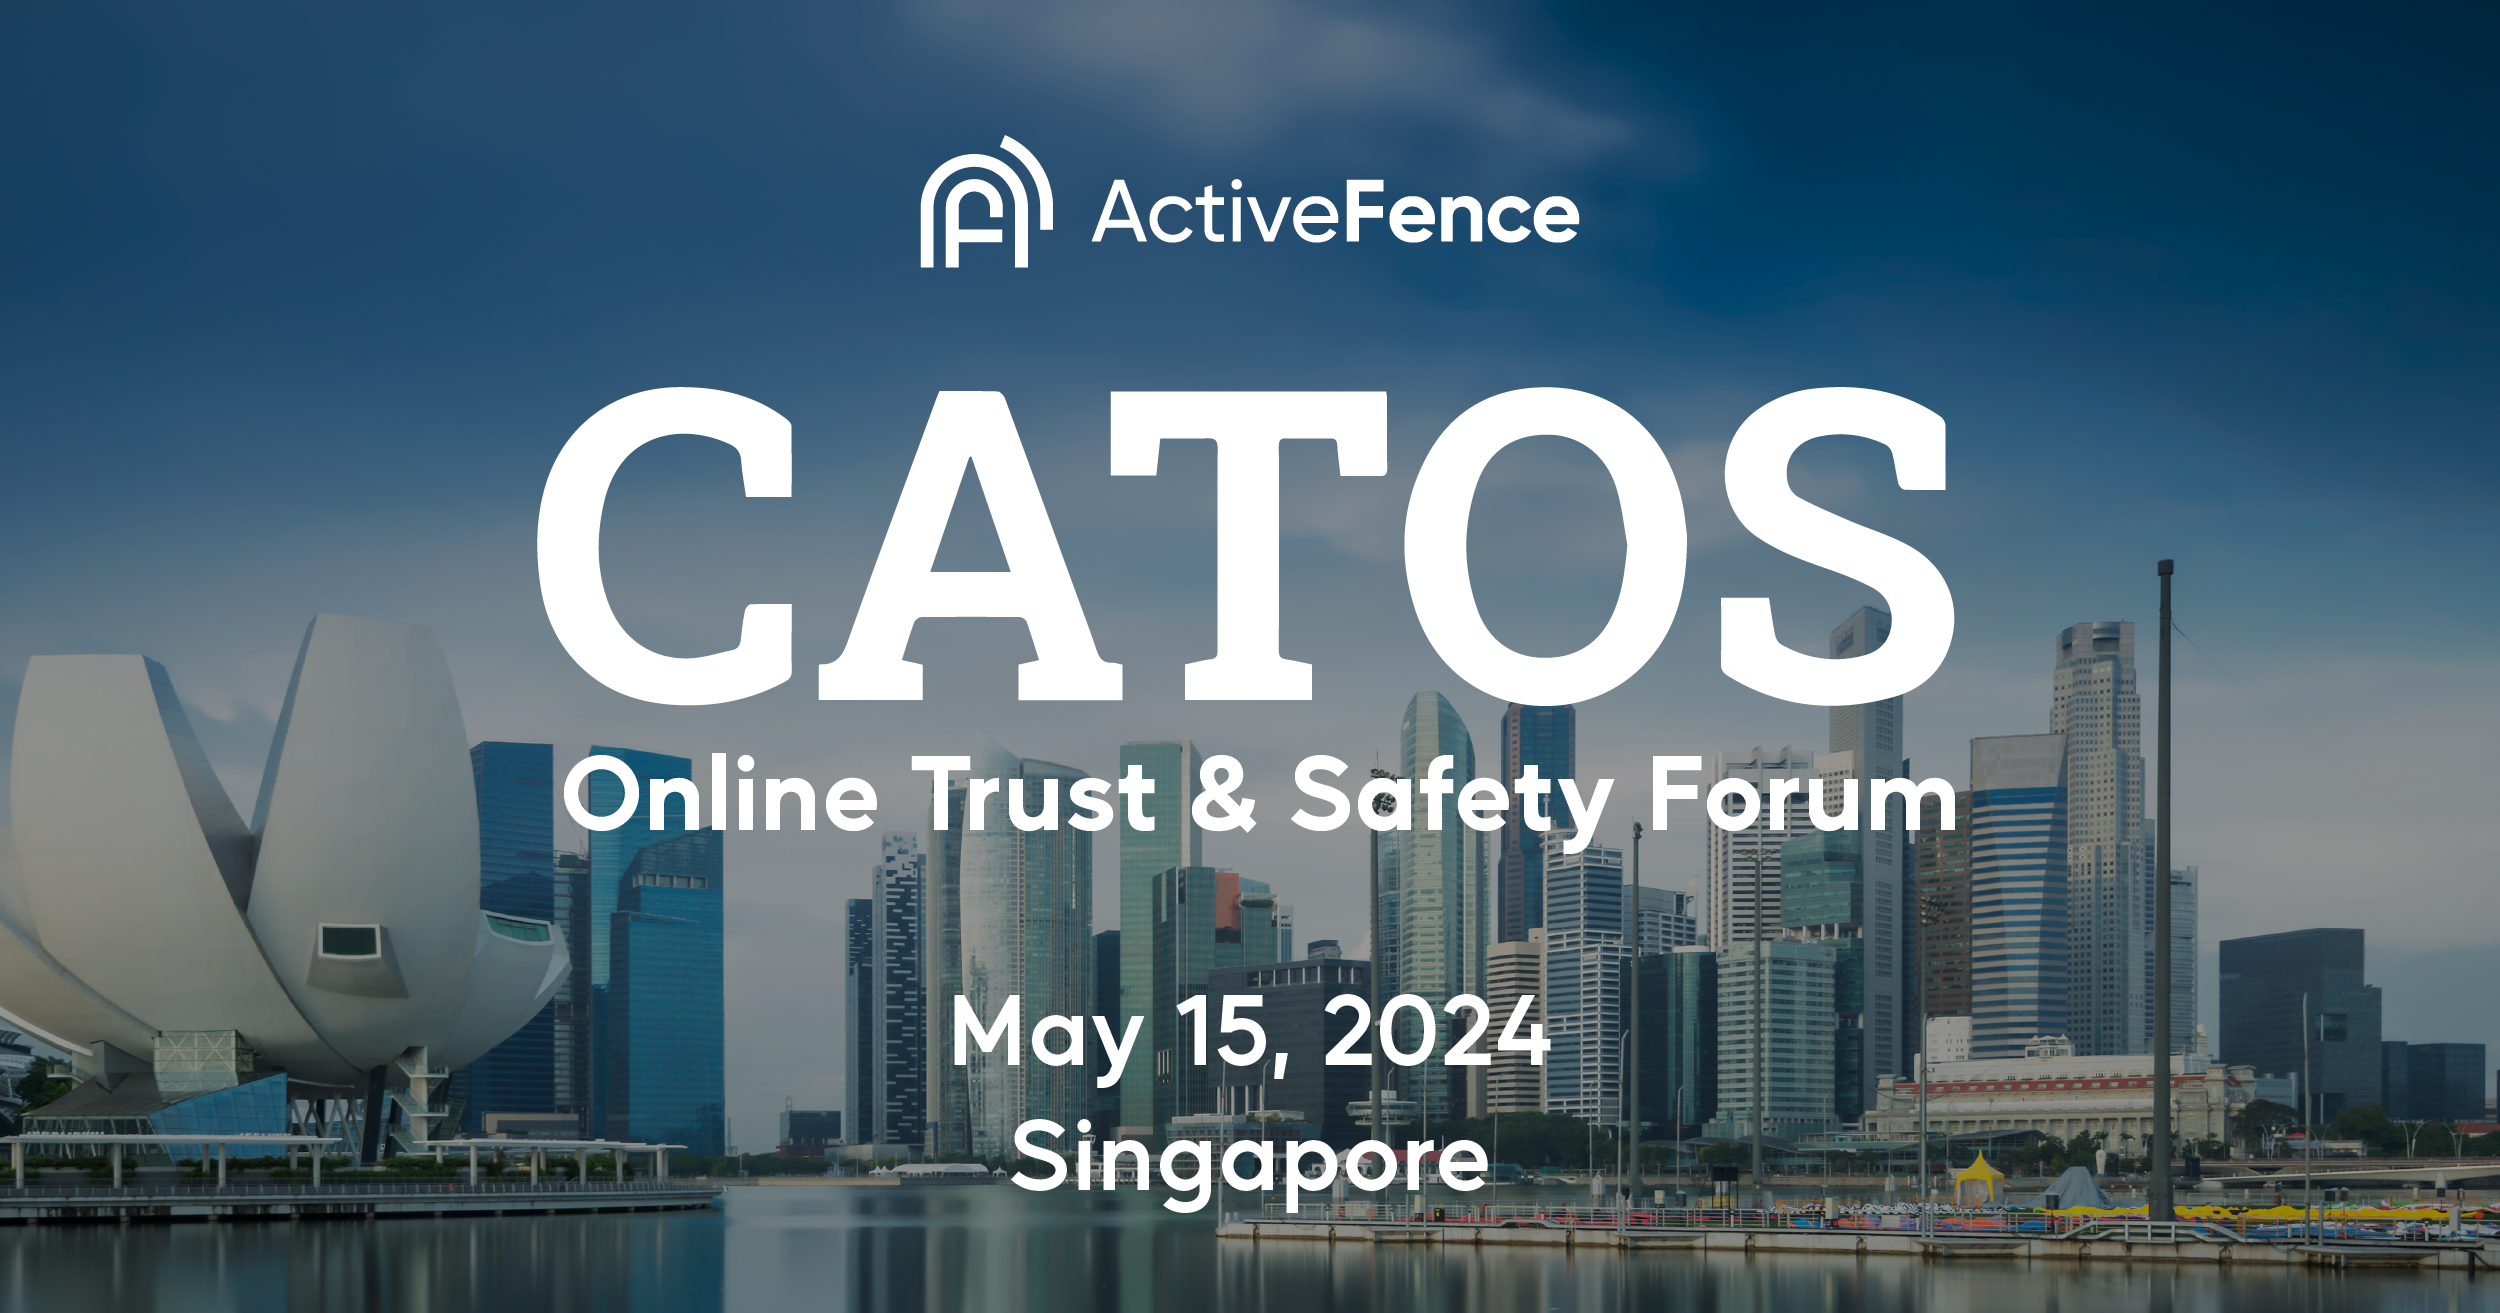 Banner for the CATOS Online Trust & Safety Forum organized by ActiveFence, scheduled for May 15, 2024, in Singapore. The background shows a cityscape of Singapore.